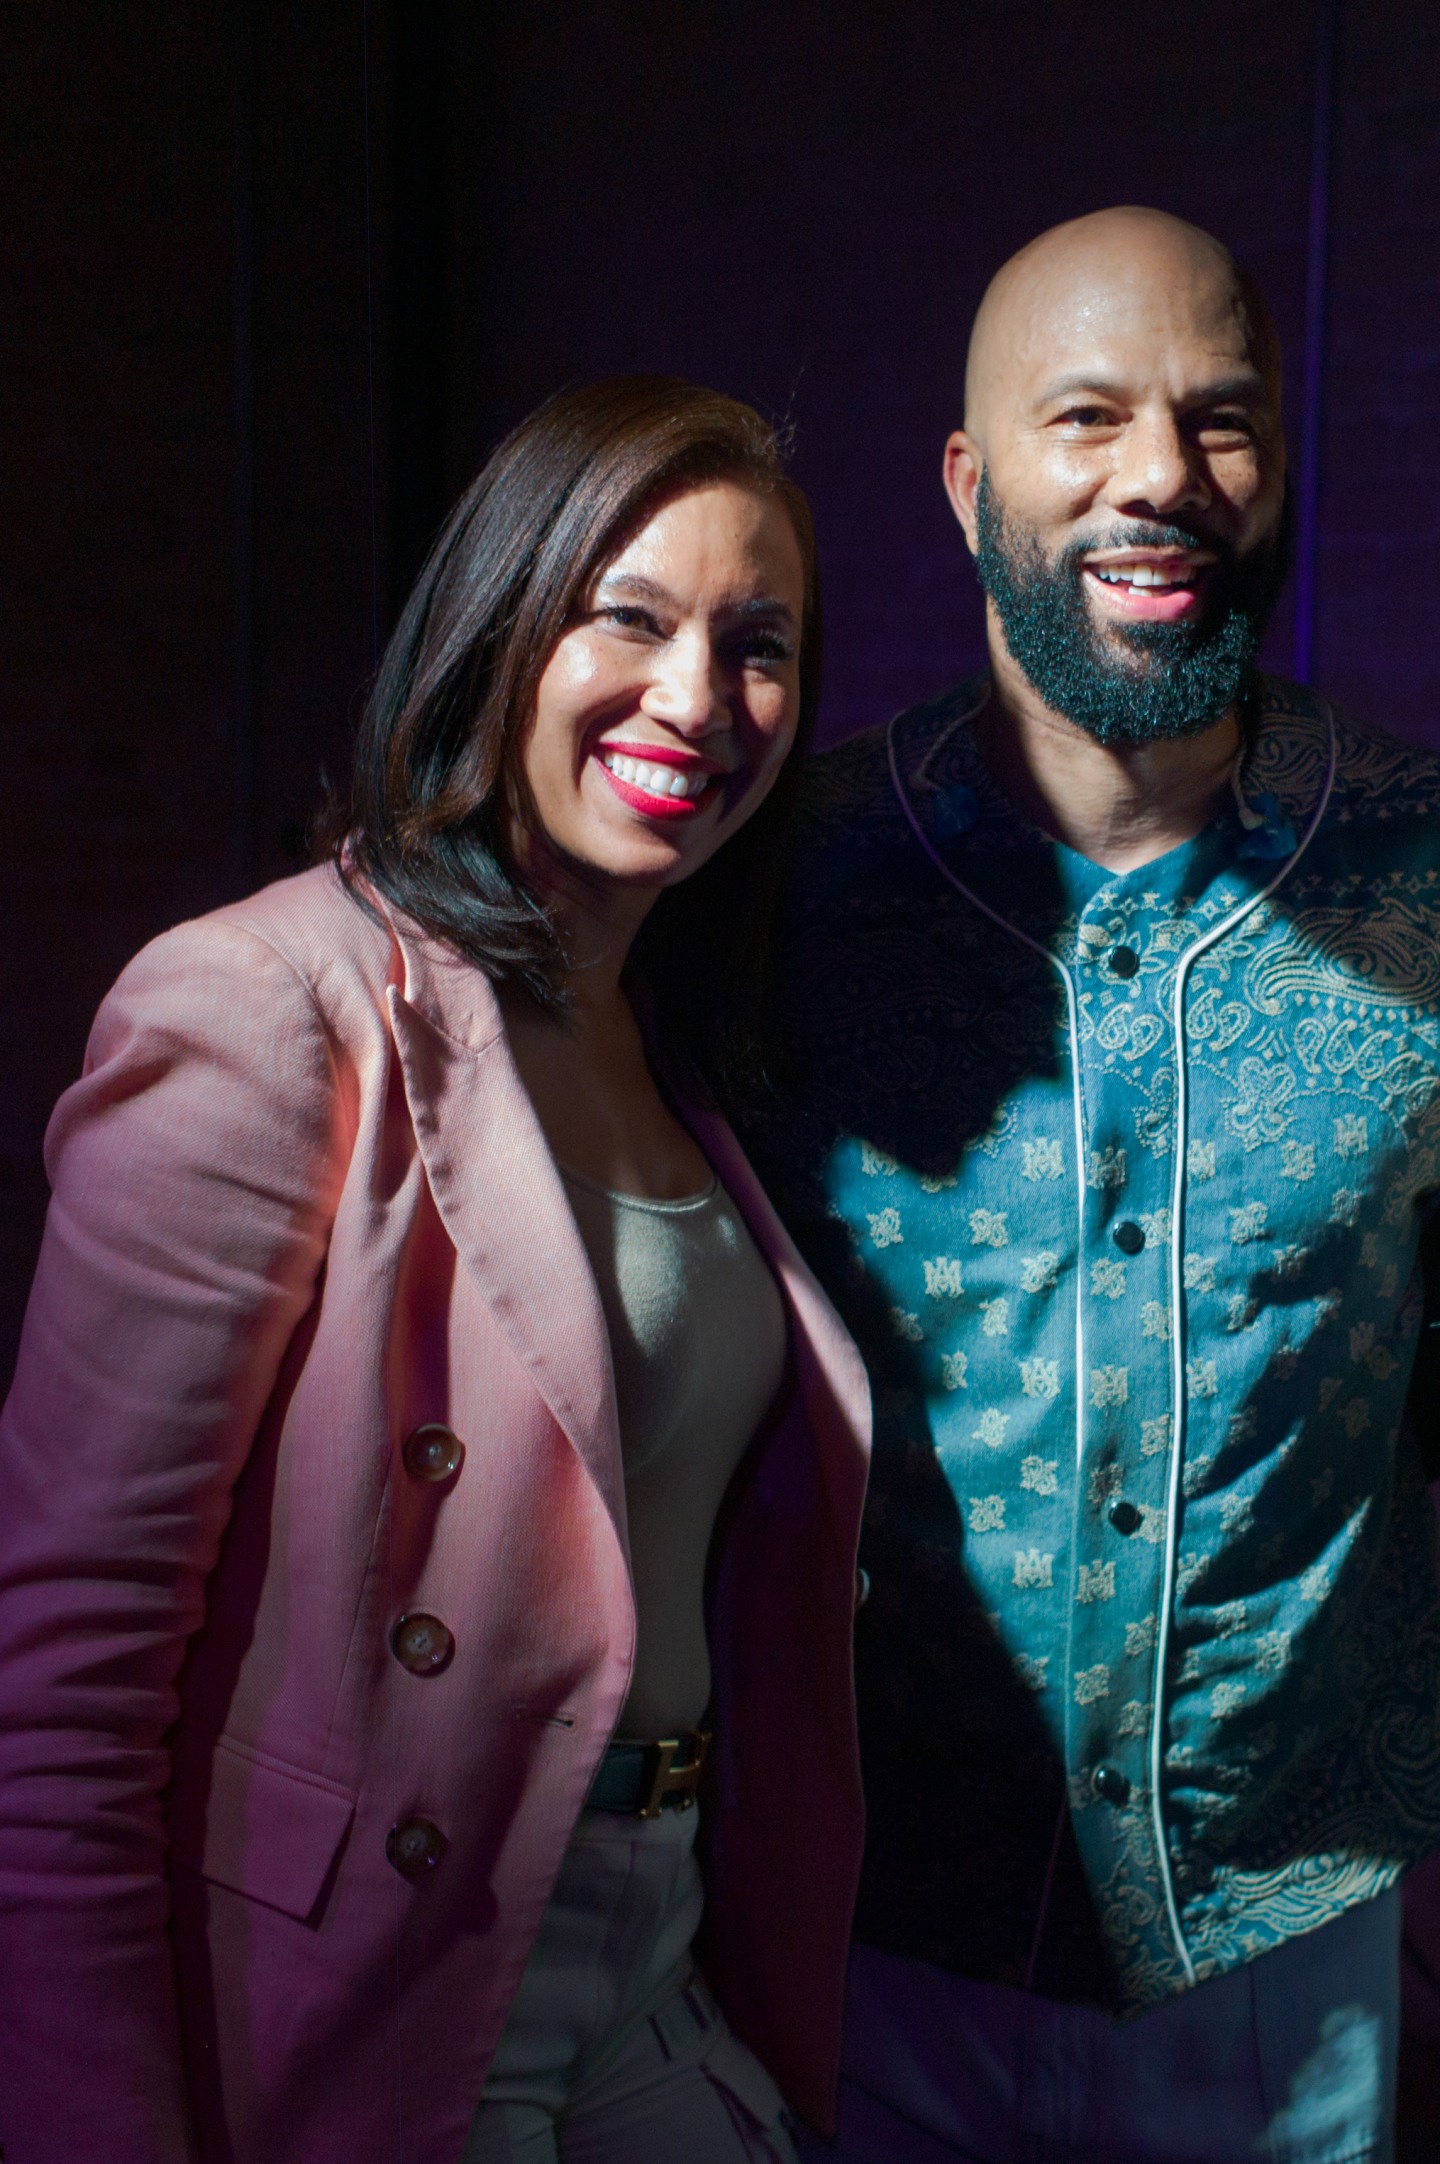 Inside Common’s SXSW party with Porsche and The FADER